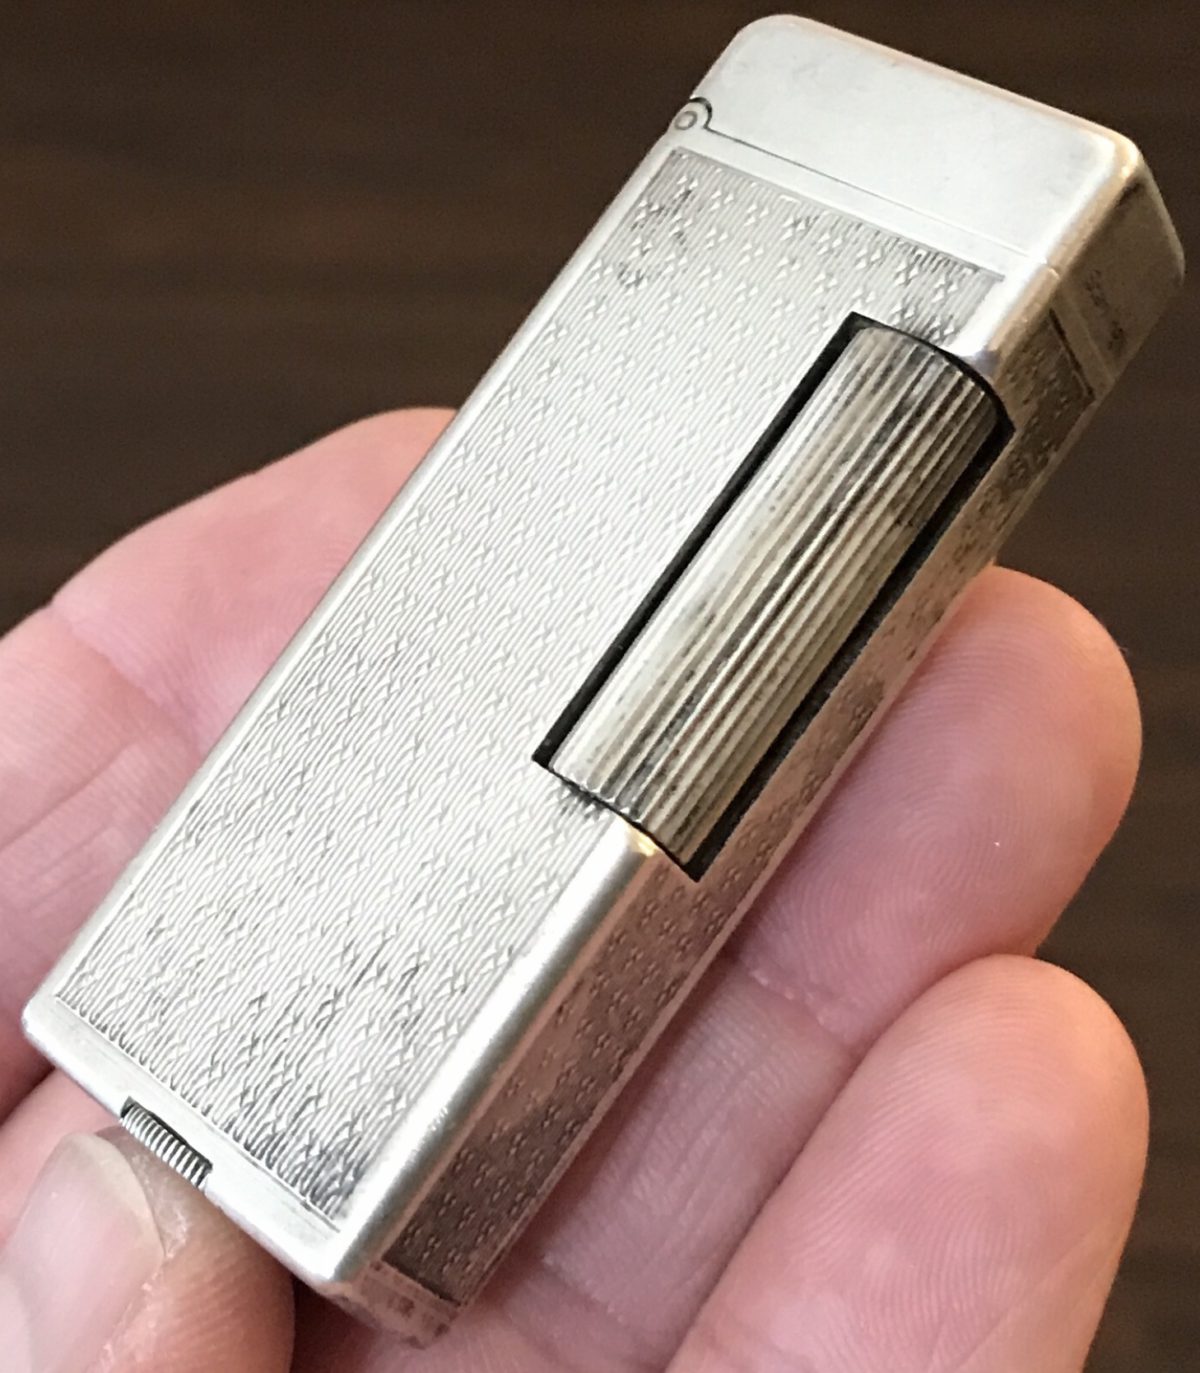 Dunhill Rollalite Petrol Lighter: An Elegant, Reliable Classic ...